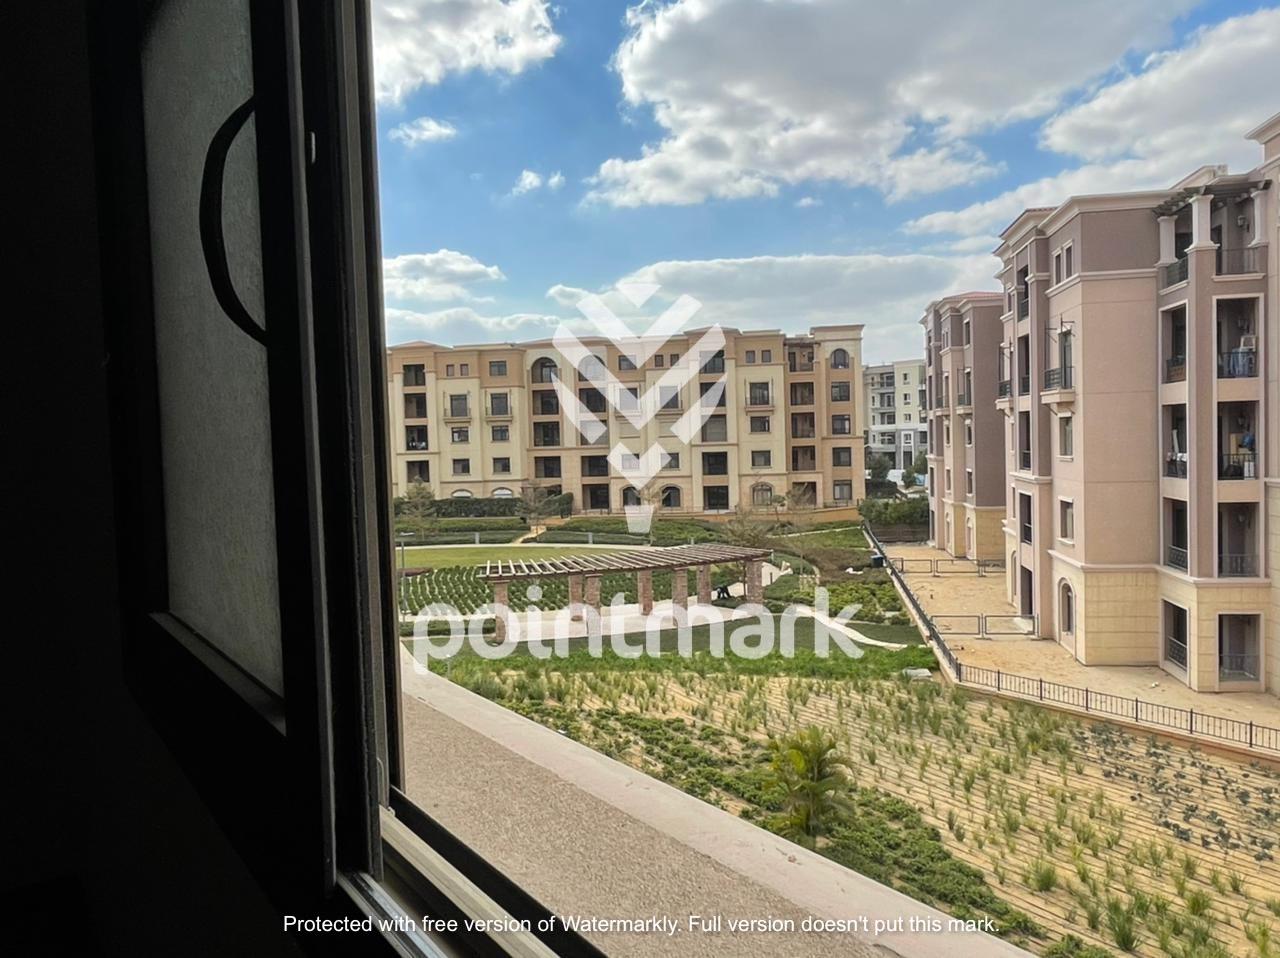 Emaar - Mivida - Apartment - Good Location with Lowest Price
Built up area : 156 sqm
- 2 Bedrooms ( 1 Master ) + Living- 2 Bathrooms- Kitchen- Reception- Terrace
* Fully Finished
Total Price : 3,700,000 LE/ cash
Mivida is strategically located in the heart of New Cairo, which is fast becoming the new residential, commercial and educational center of the capital. Mivida is ideally located close to the American University in Cairo, just 20 minutes from Cairo International Airport, and within easy reach of the ninety Street and the Suez-Sokhna Road. Nature has given Mivida a unique gift represented by two natural valleys that extend with their charming green to embrace modern homes in a wonderful beauty scene, and in order to preserve this distinctive environmentally friendly character, these green valleys were left without barriers to welcome residents and visitors so that they can enjoy this spectacular scene. The ingenious urban design included an ideal promenade and seating areas that provide great viewing to hear the enchanting surrounding landscape.